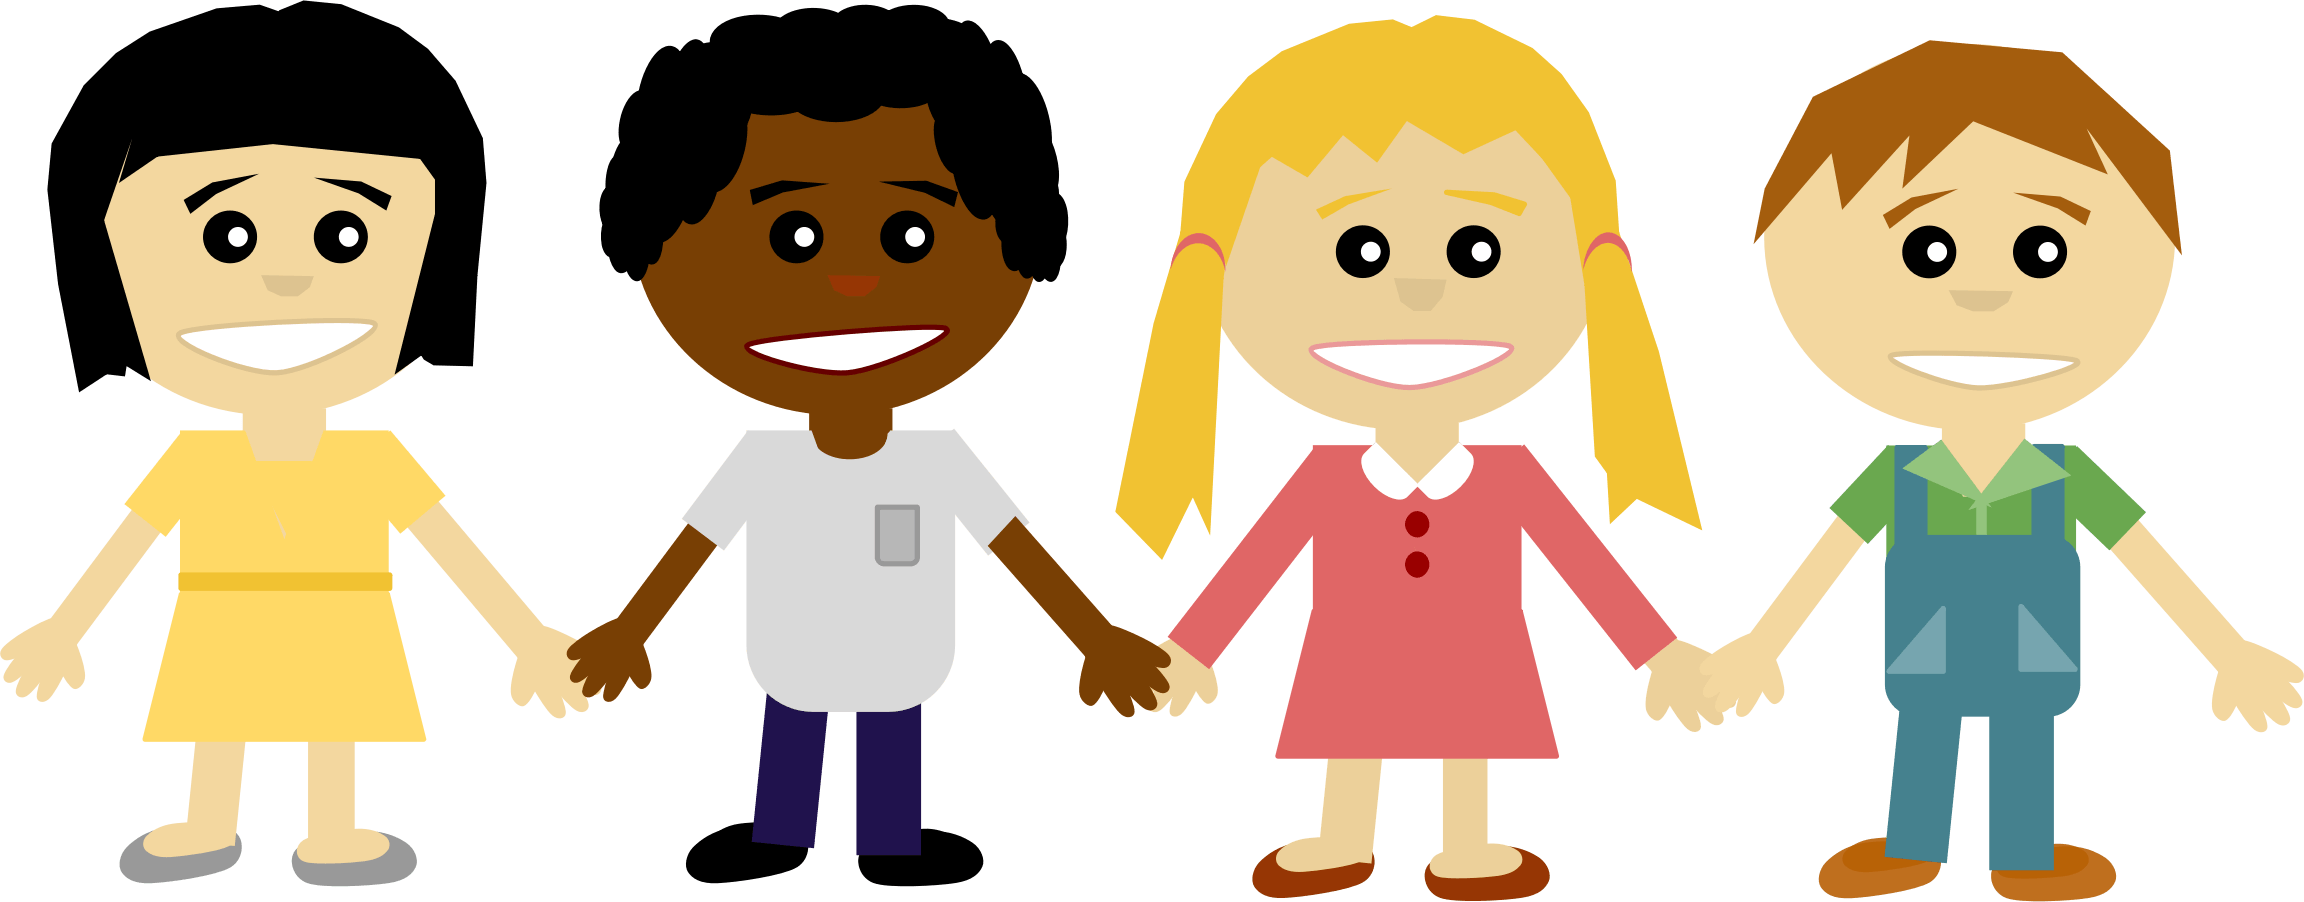 Children holding hands Icon PNG PNG and Icon Downloads